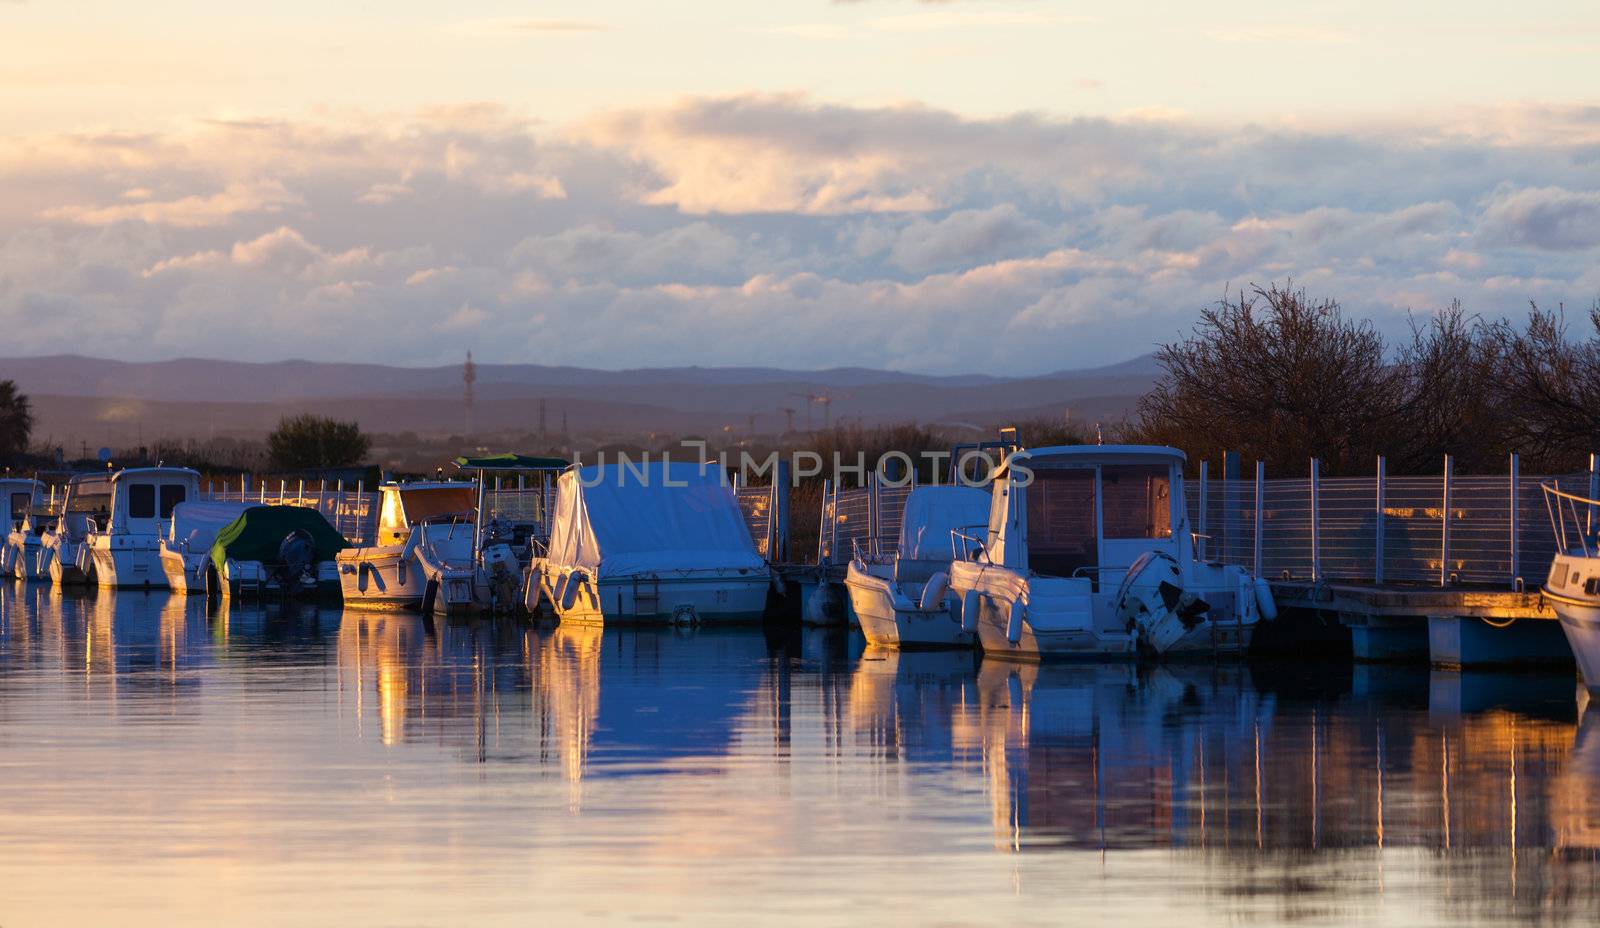 Boats in a marina at sunset by Discovod